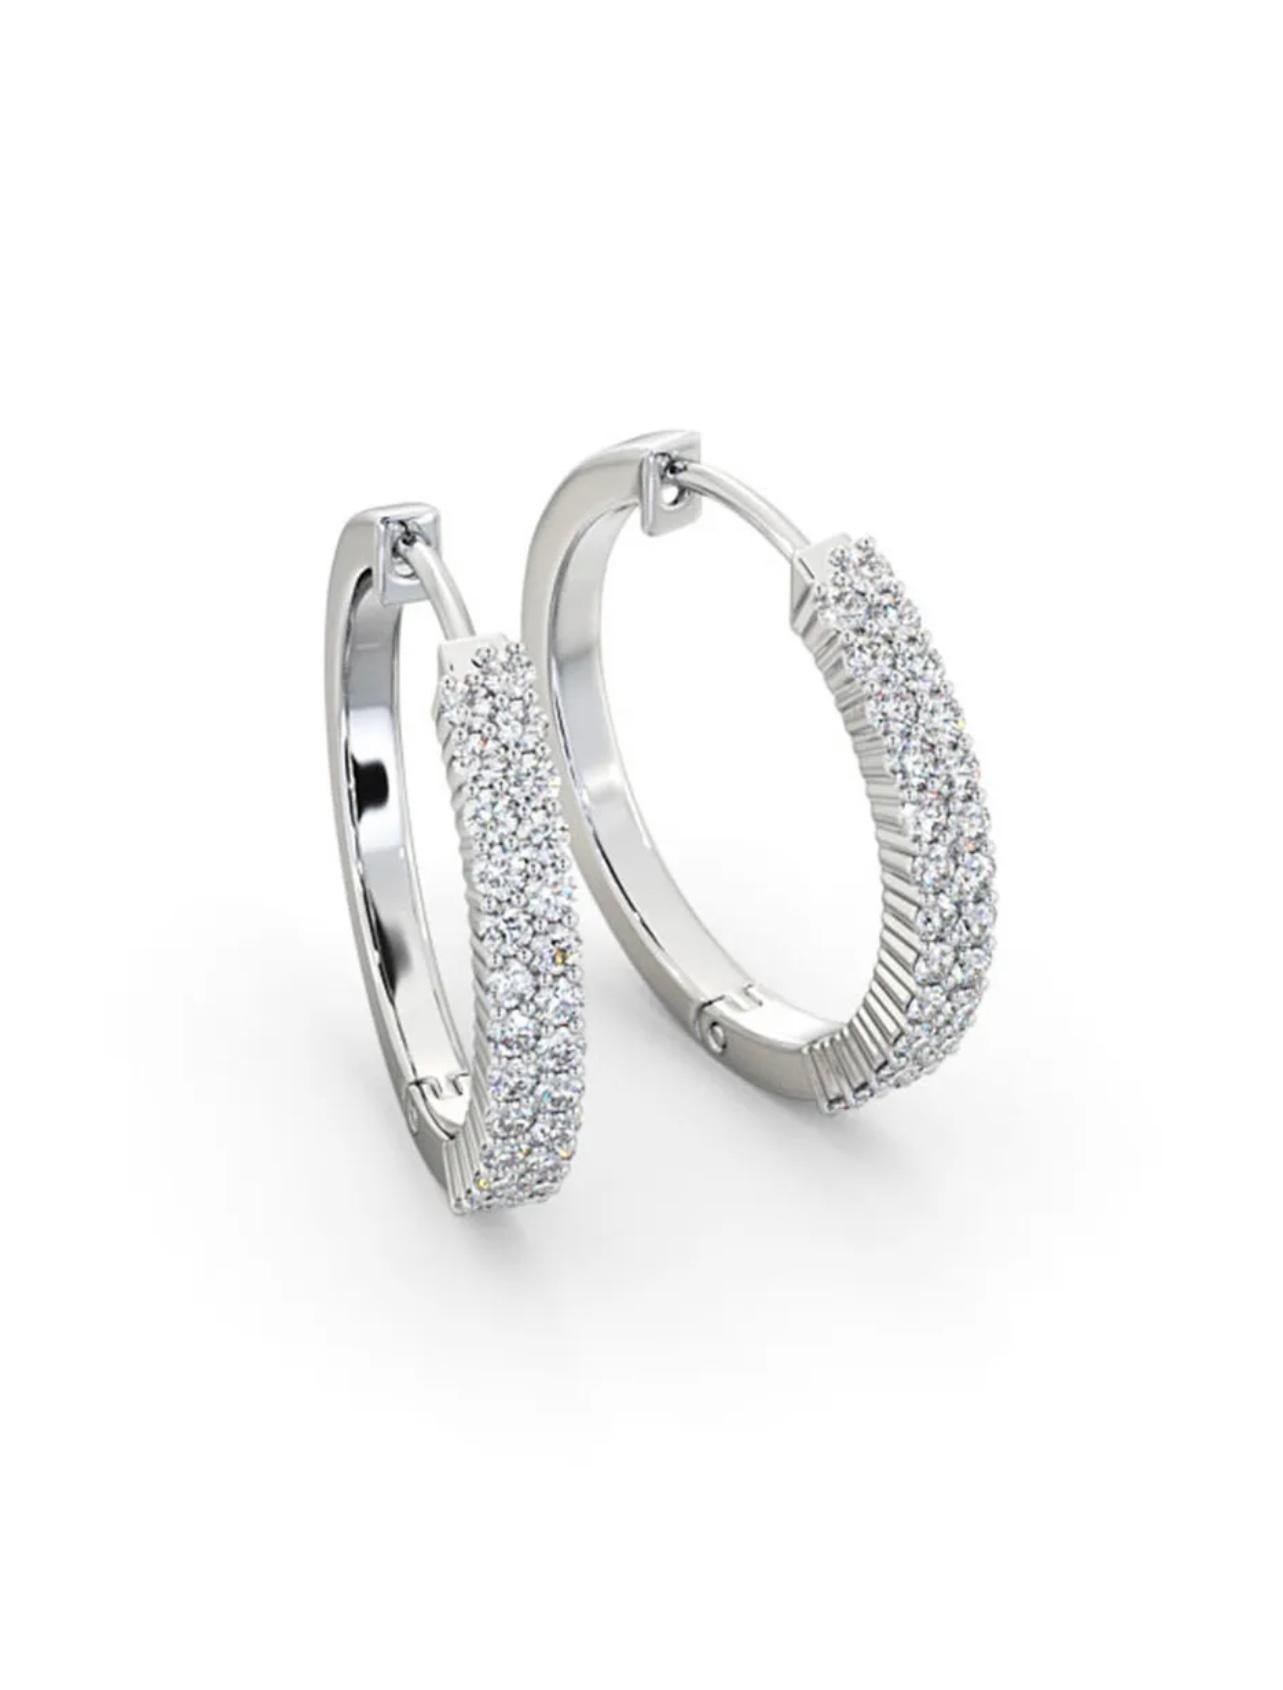 1ct Diamond Earrings Hoops 18ct White Gold In New Condition For Sale In Ilford, GB